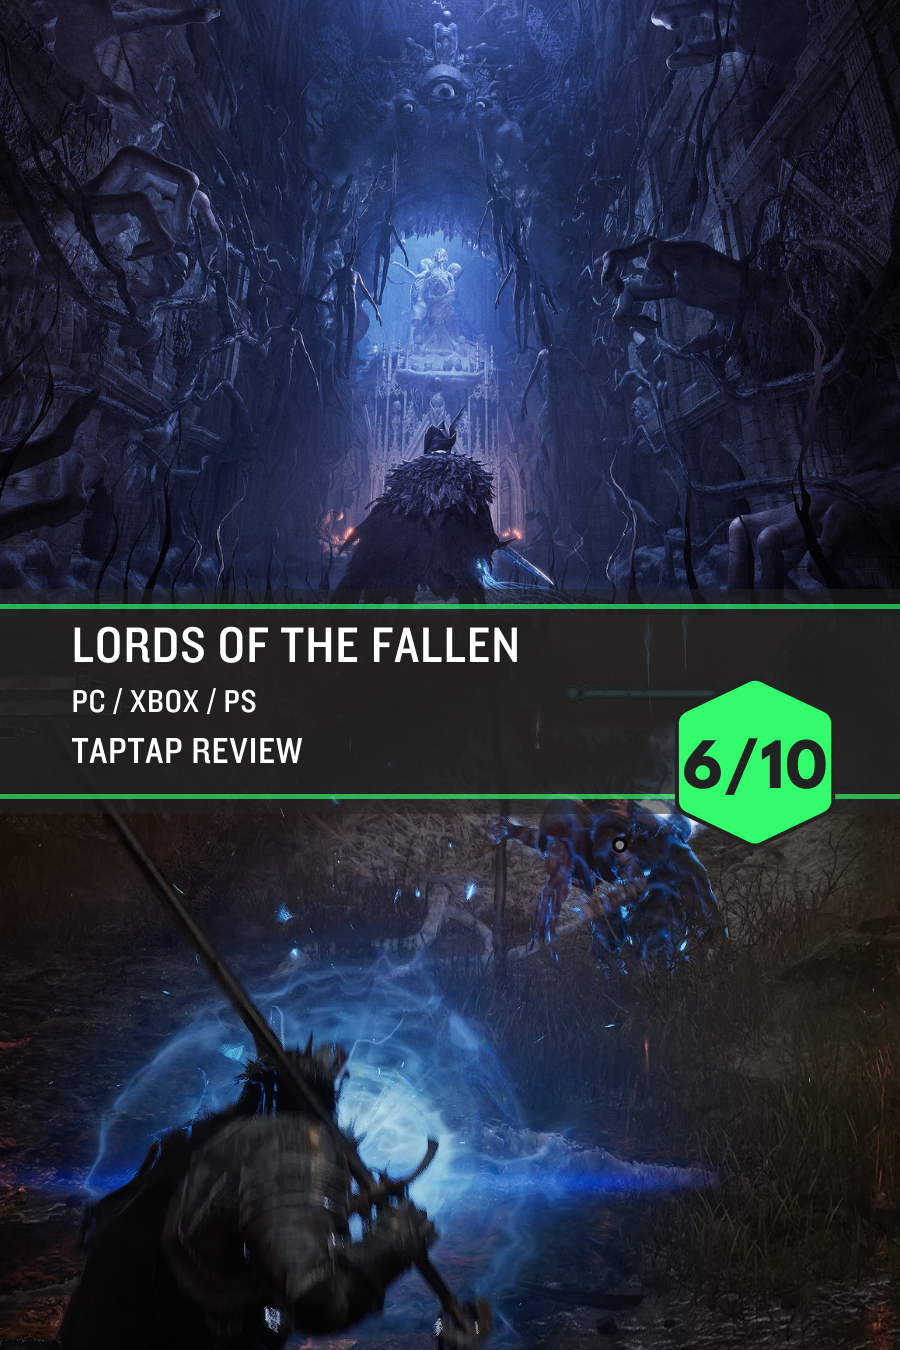 Lords of the Fallen: a dark fantasy action RPG and reboot of the